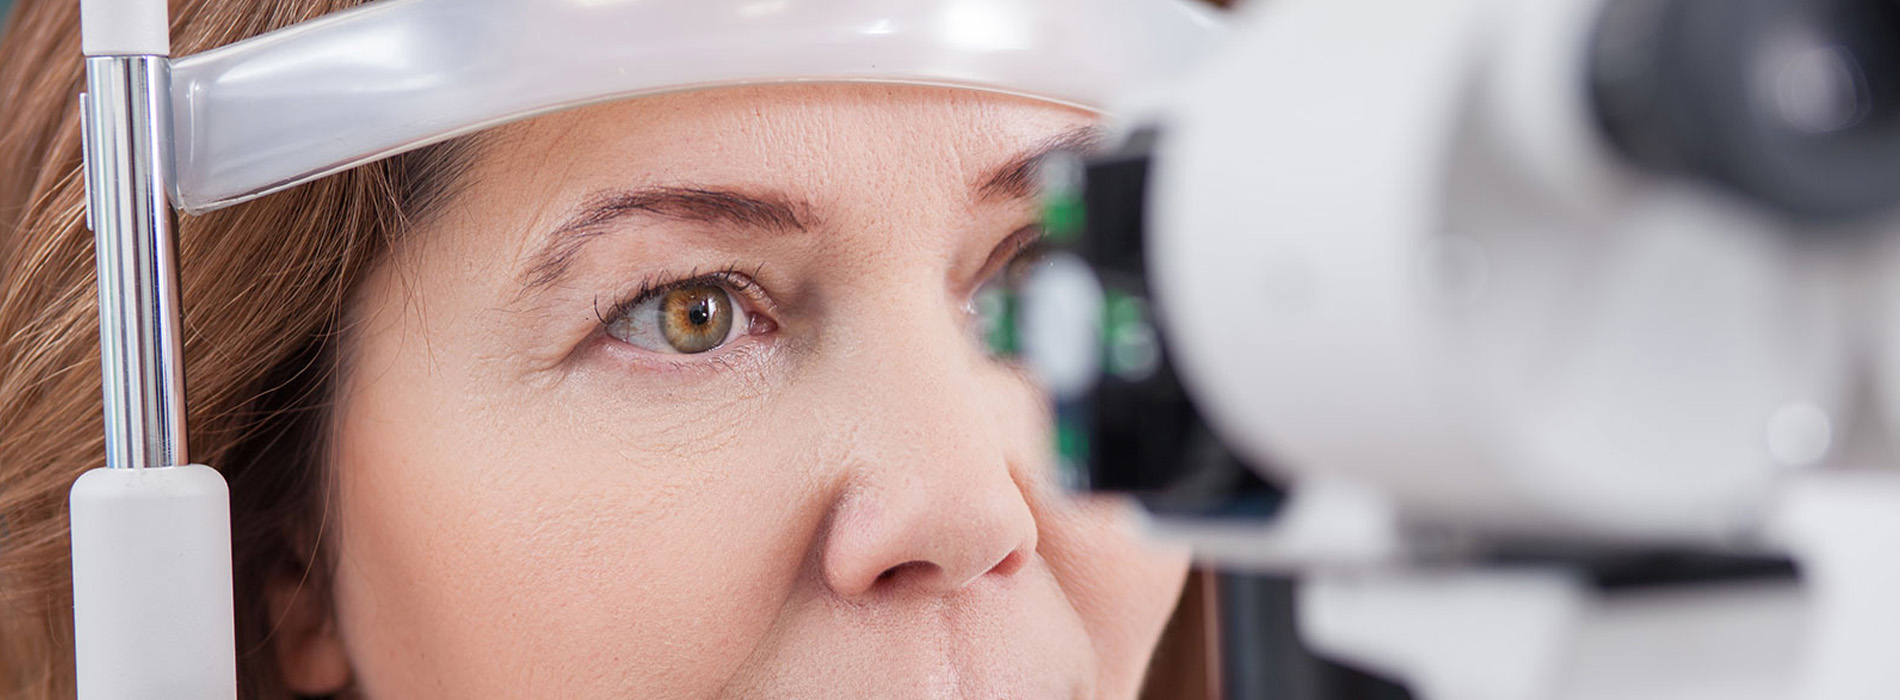 A woman undergoing an eye examination, with a focus on the eye machine and her gaze directed towards it.